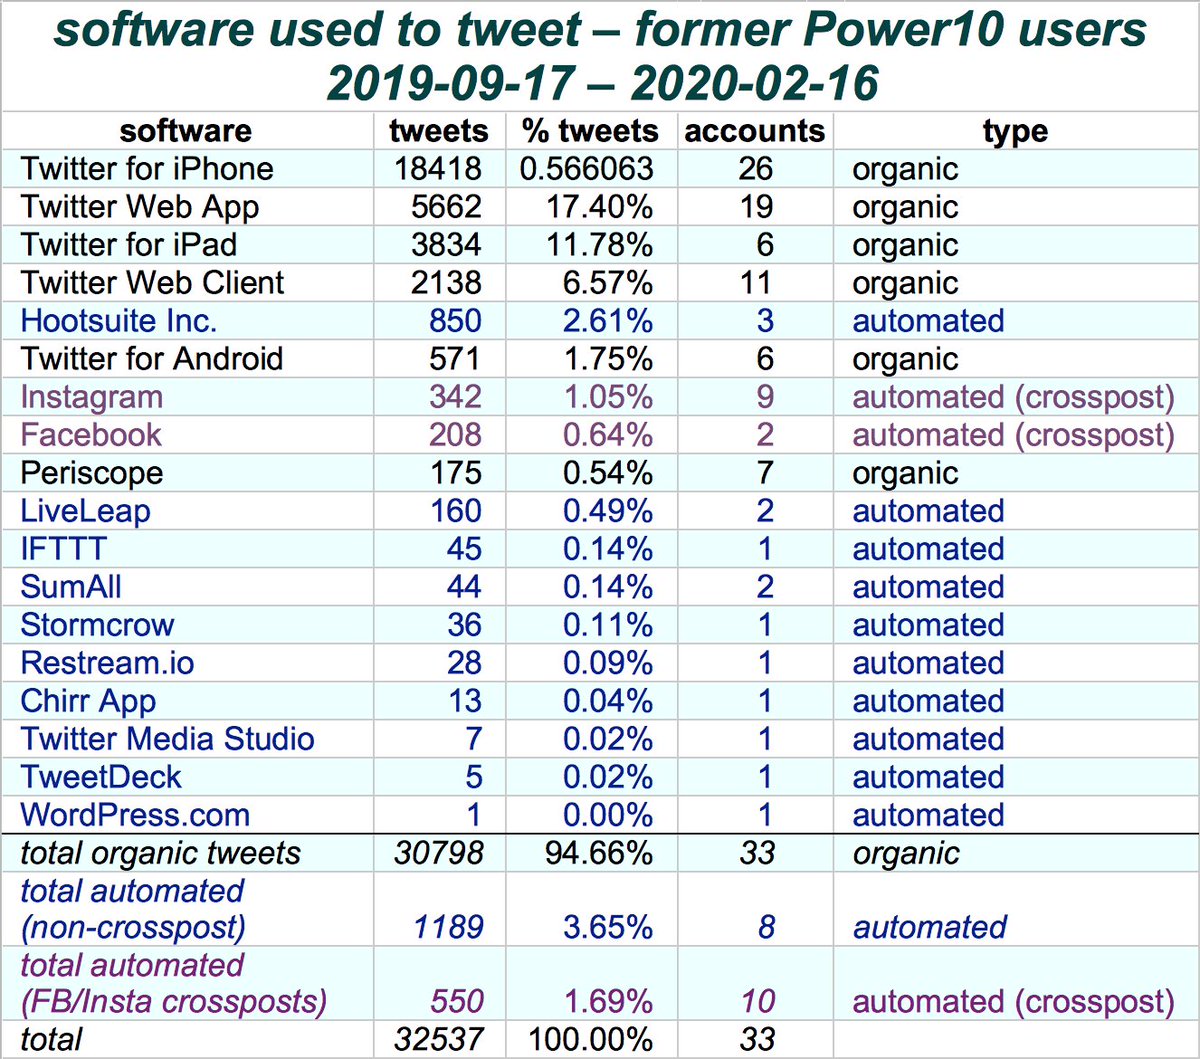 Five months down the road, and the former Power10 users by and large have yet to regain their taste for automating their Twitter accounts: excluding Facebook/Instagram crossposts, only 3.65% of their tweets since the demise of Power10 are automated.